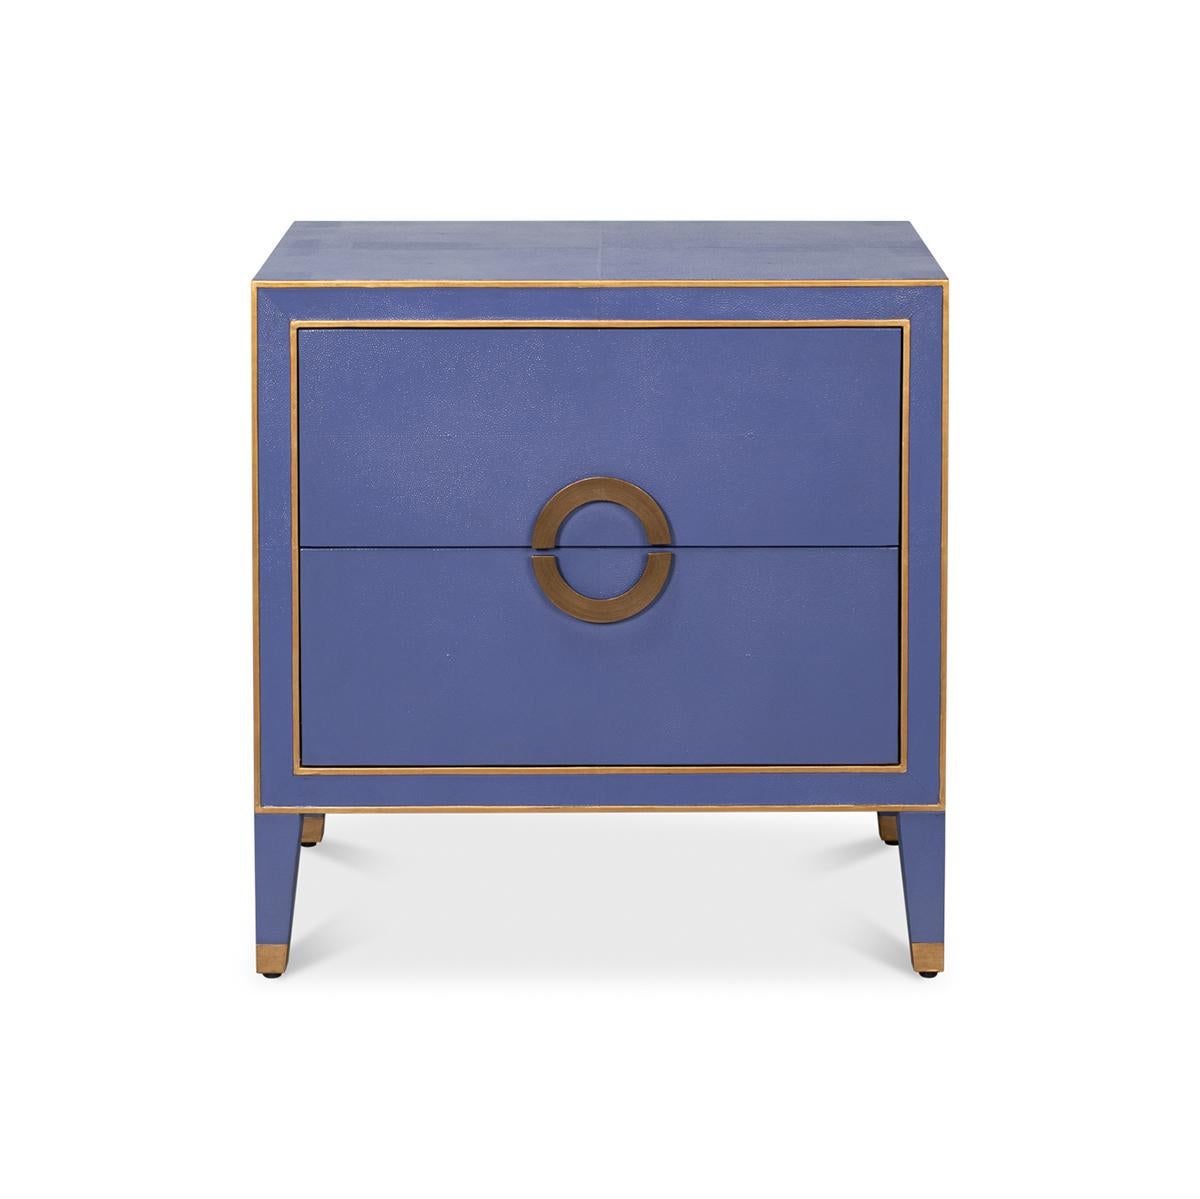 This piece combines functionality with unparalleled style, creating a statement of transitional elegance.

The standout feature of this nightstand is the rich, bright blue hue that perfectly contrasts with the elegant golden accents, bringing a